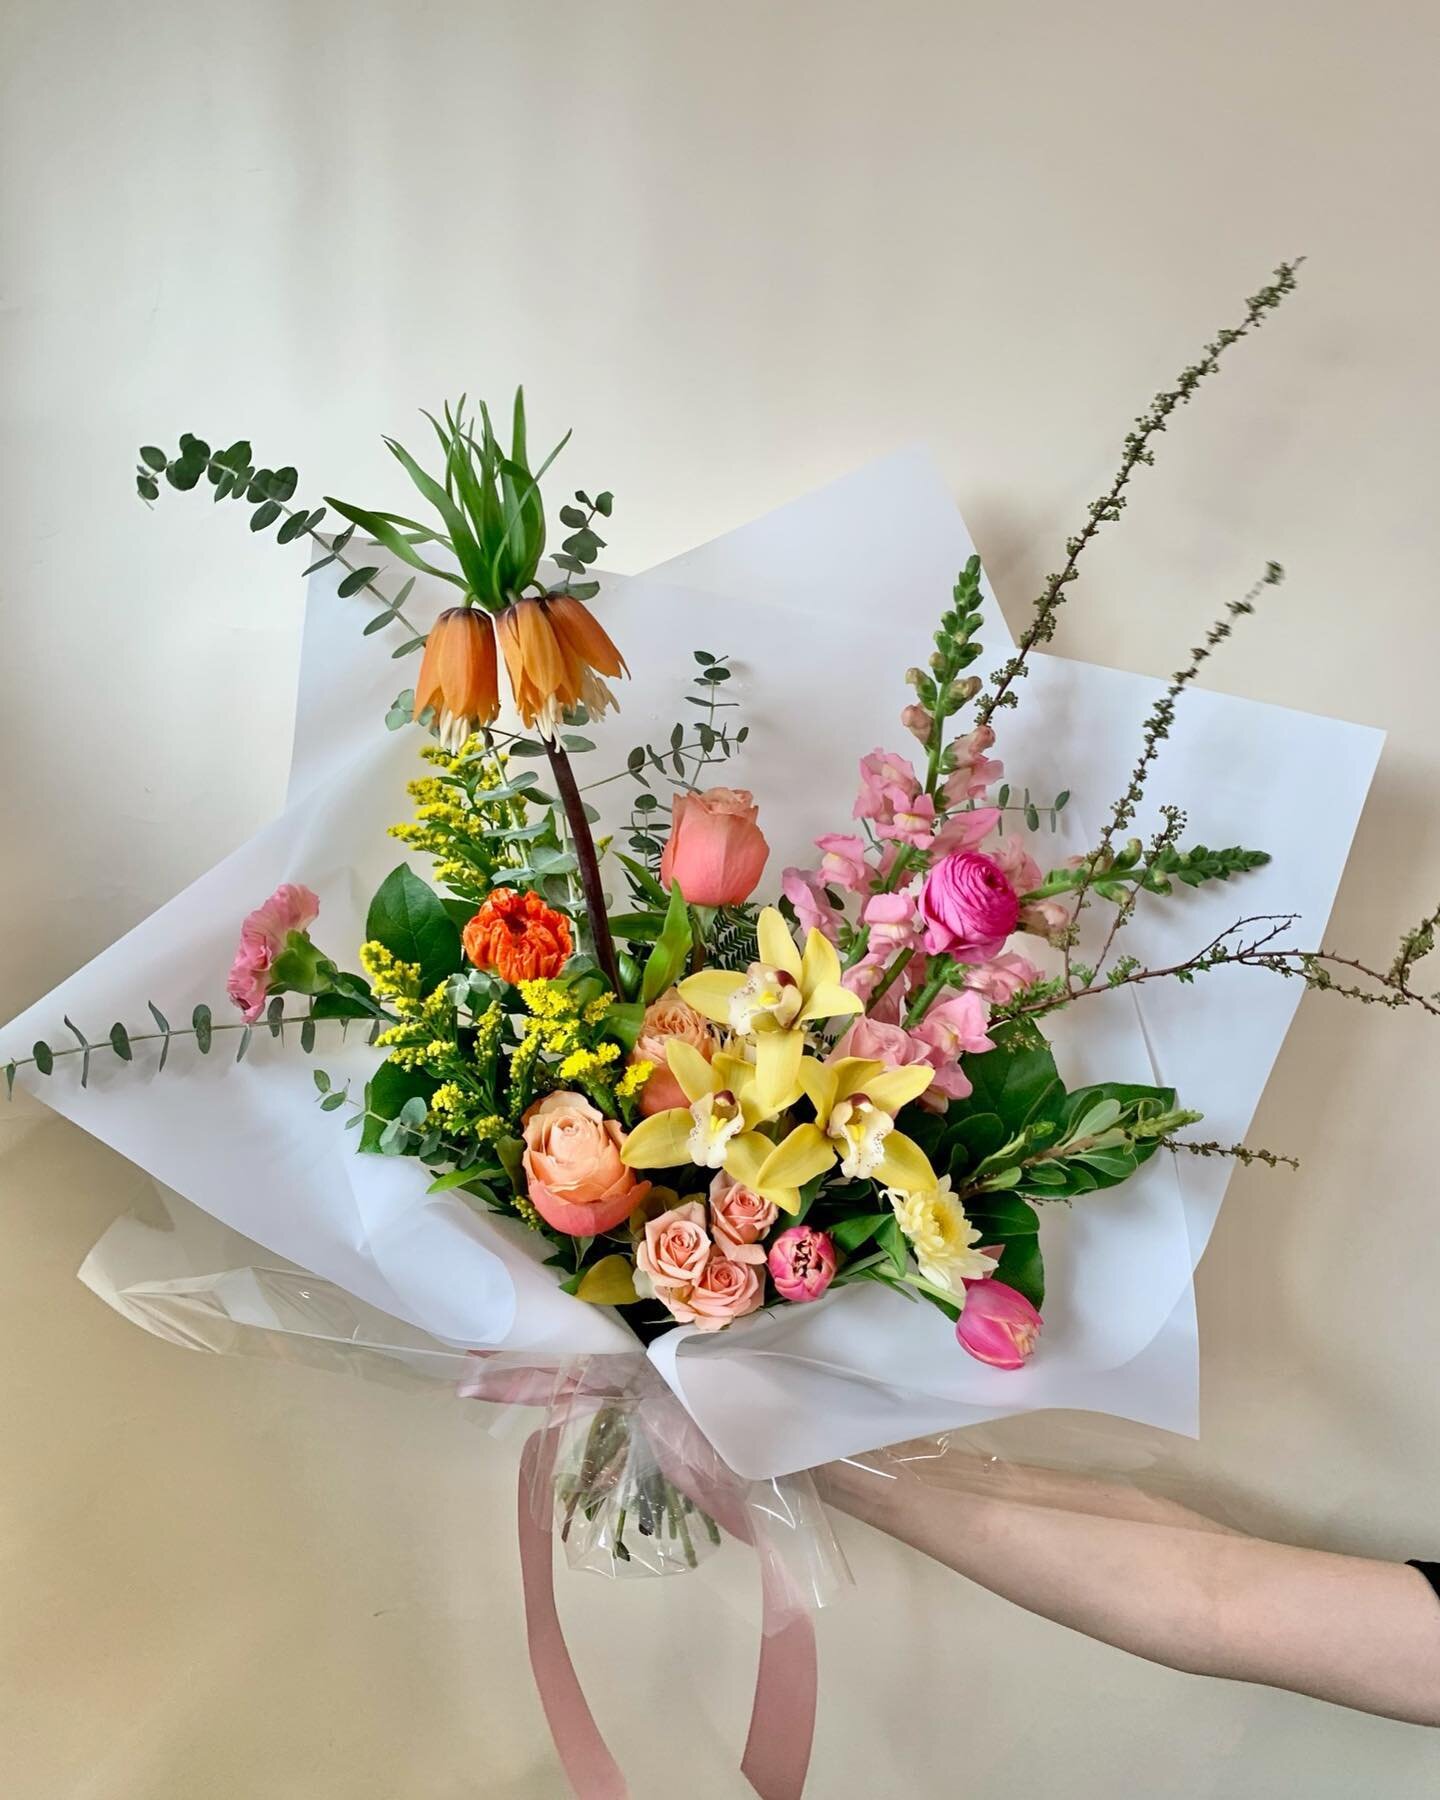 It&rsquo;s that time of year, Mother&rsquo;s Day is just around the corner!

We are so excited to share that our Mother&rsquo;s Day Collection is now available to pre-order in our online floral shop! Our design team has put together some beautiful of